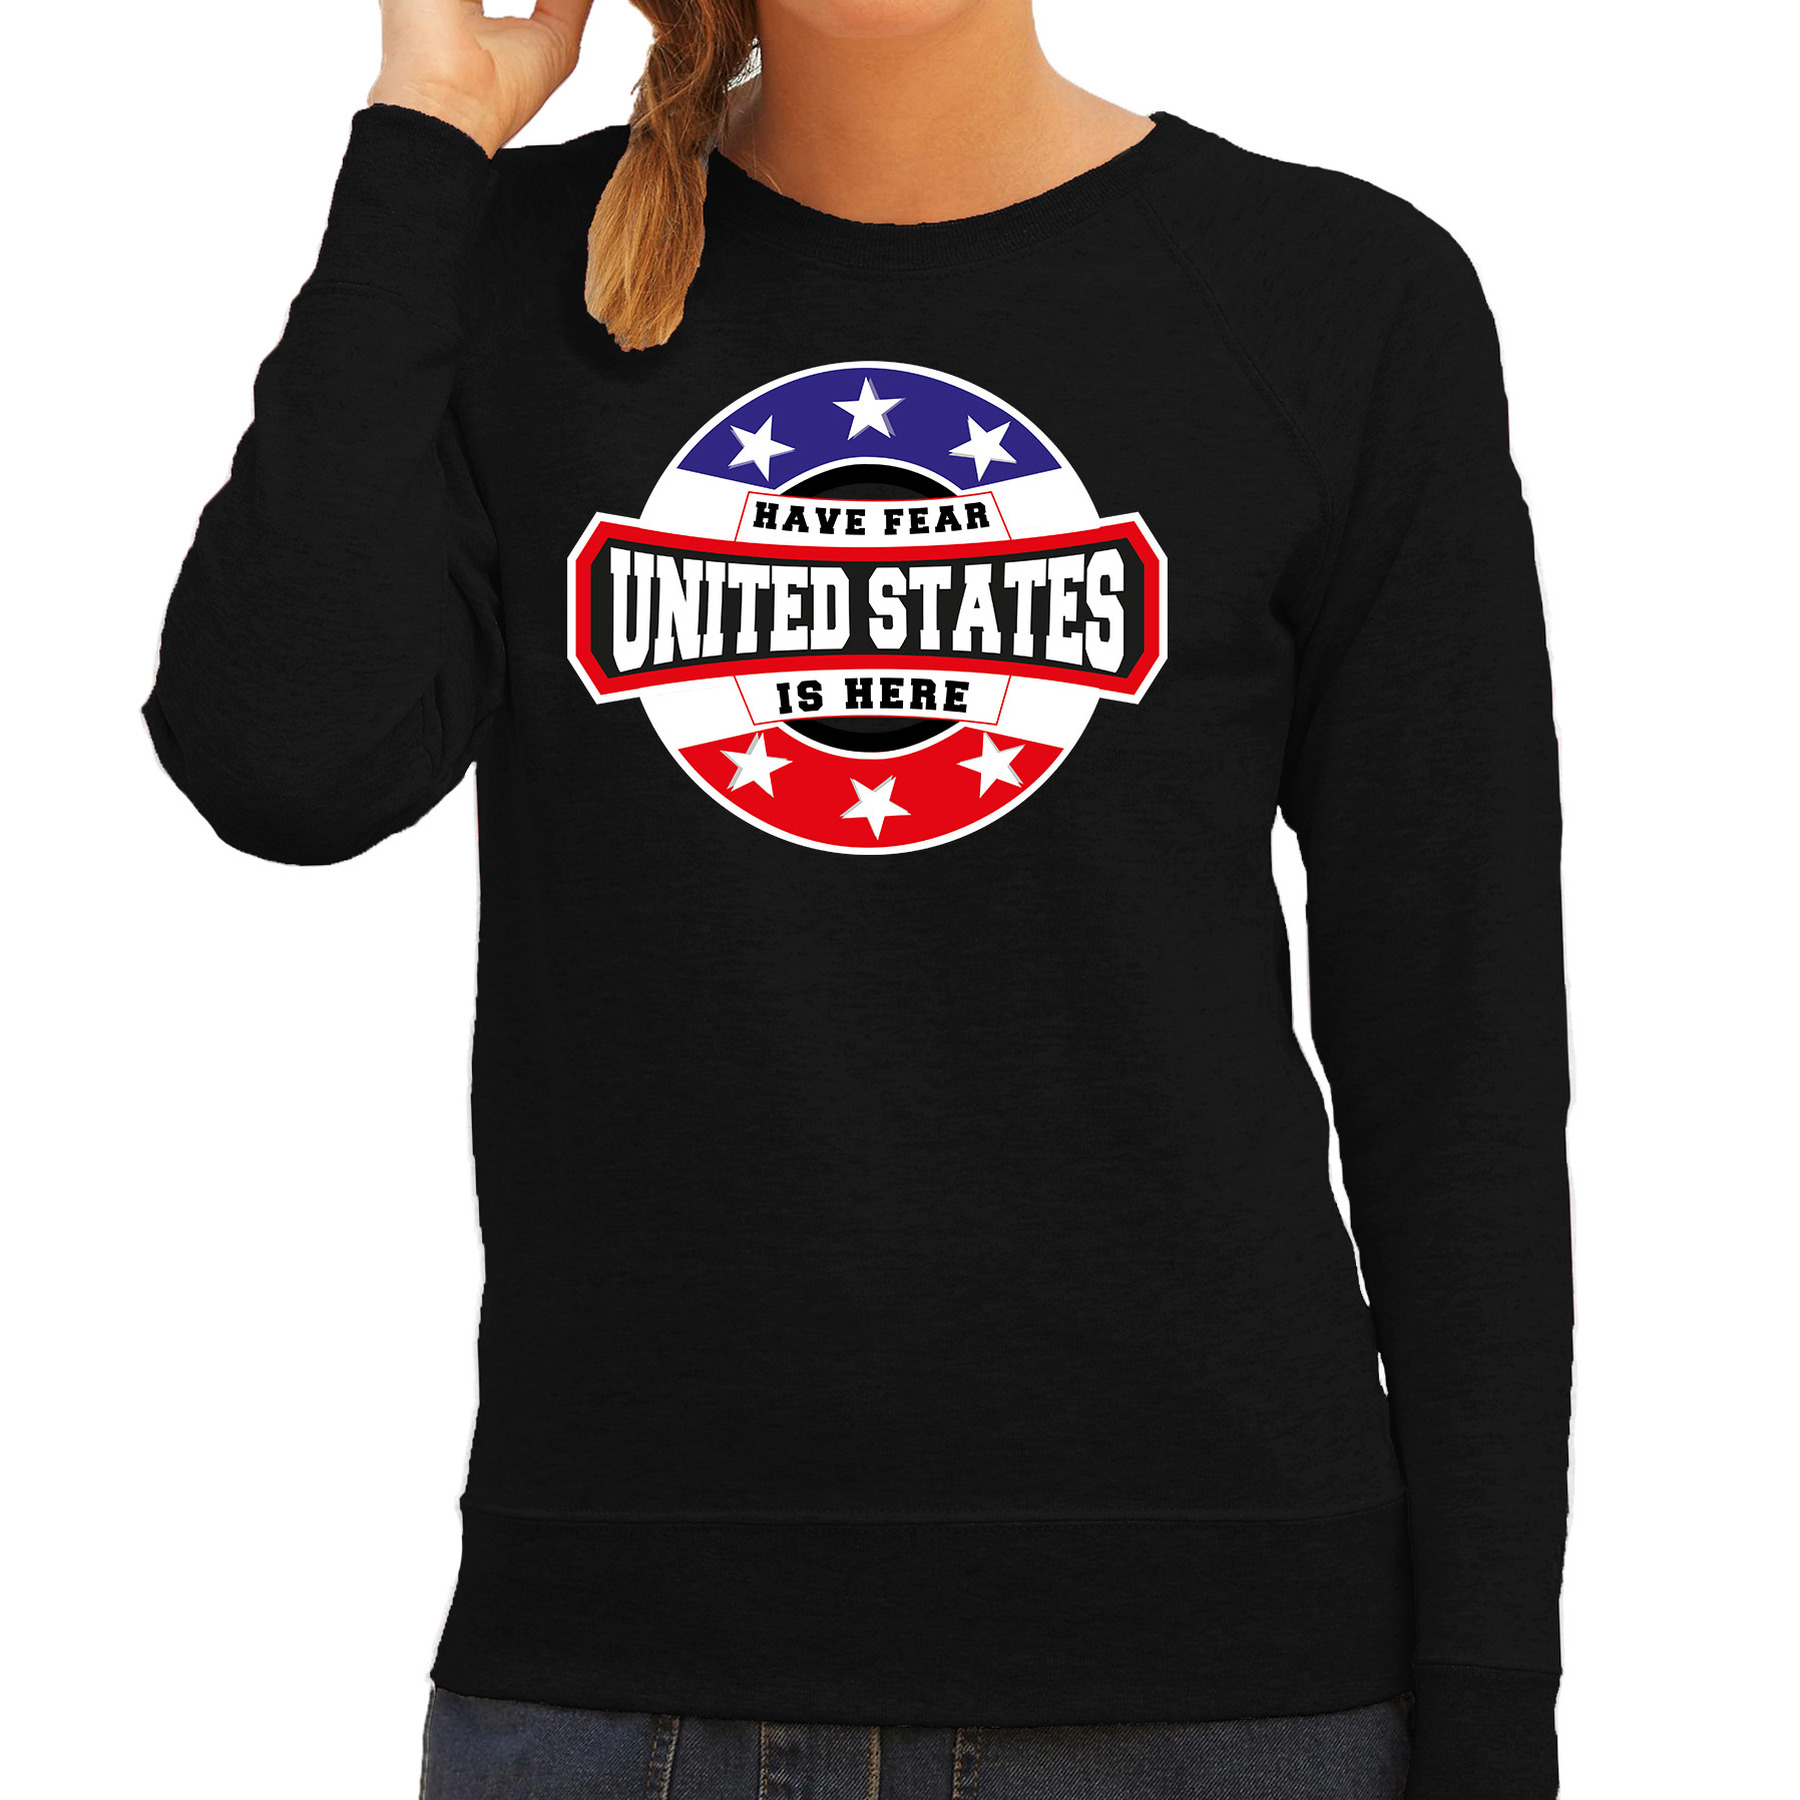 Have fear United States is here / Amerika supporter sweater zwart voor dames